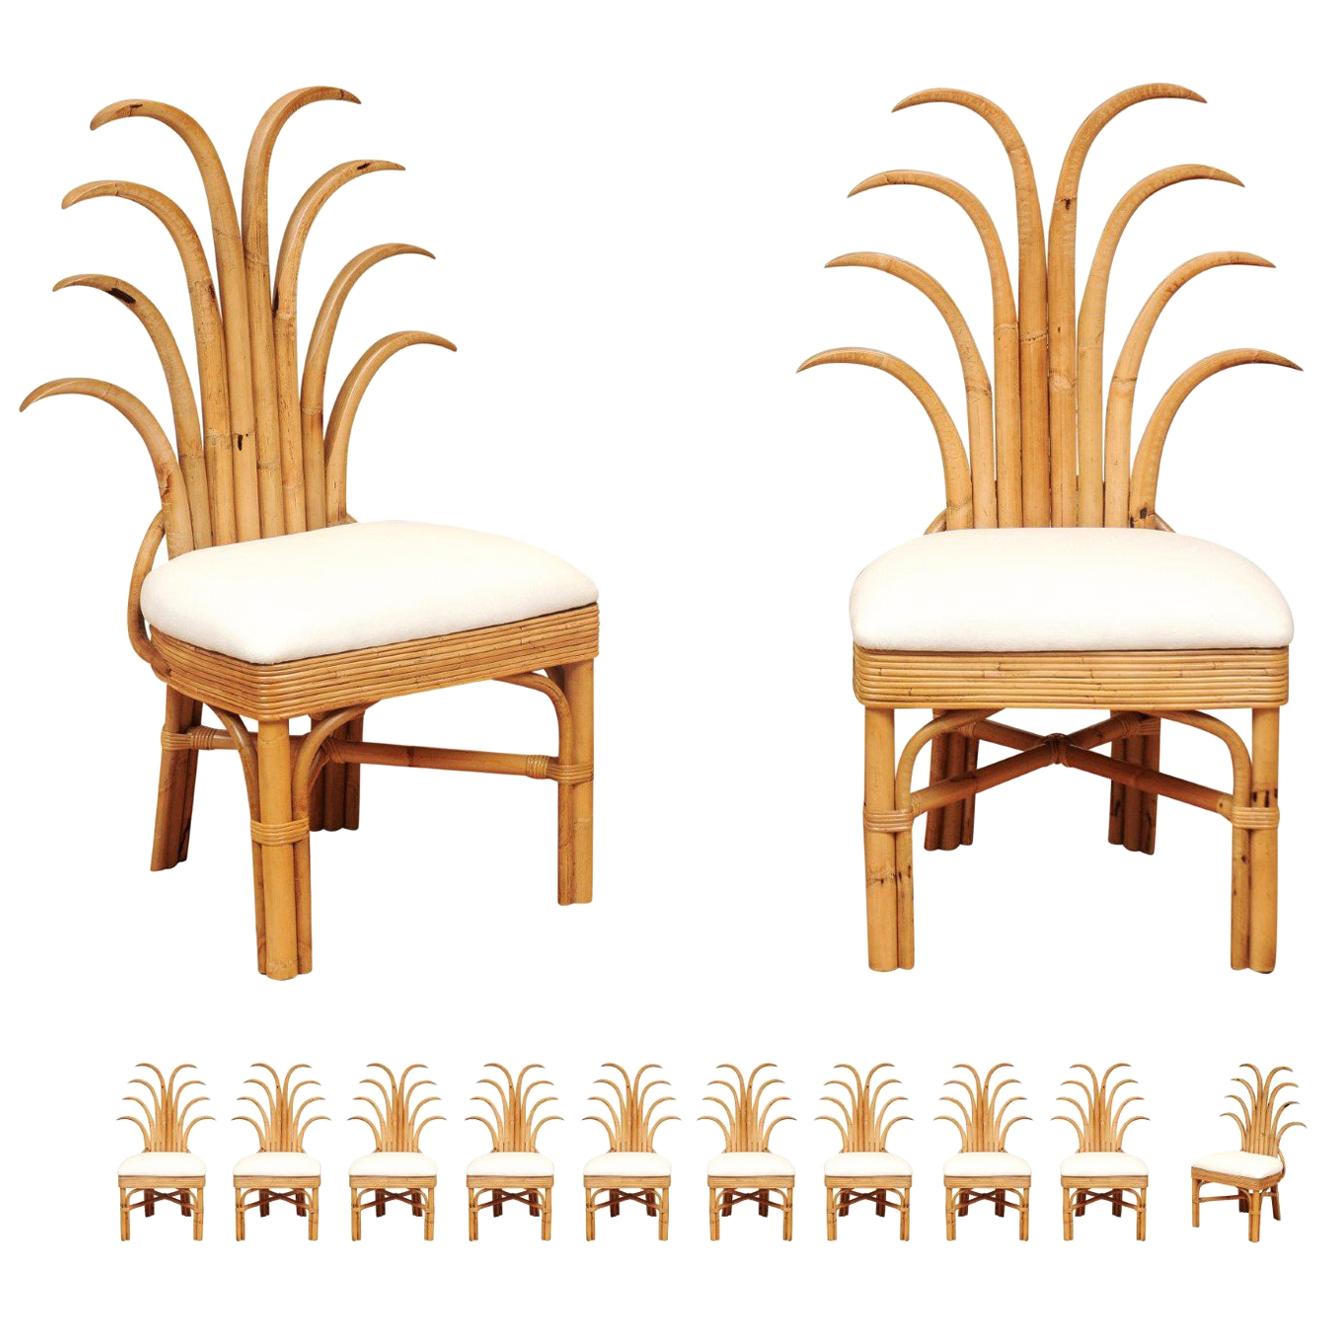 Exquisite Set of 12 Rattan and Cane Palm Frond Dining Chairs, circa 1950 For Sale